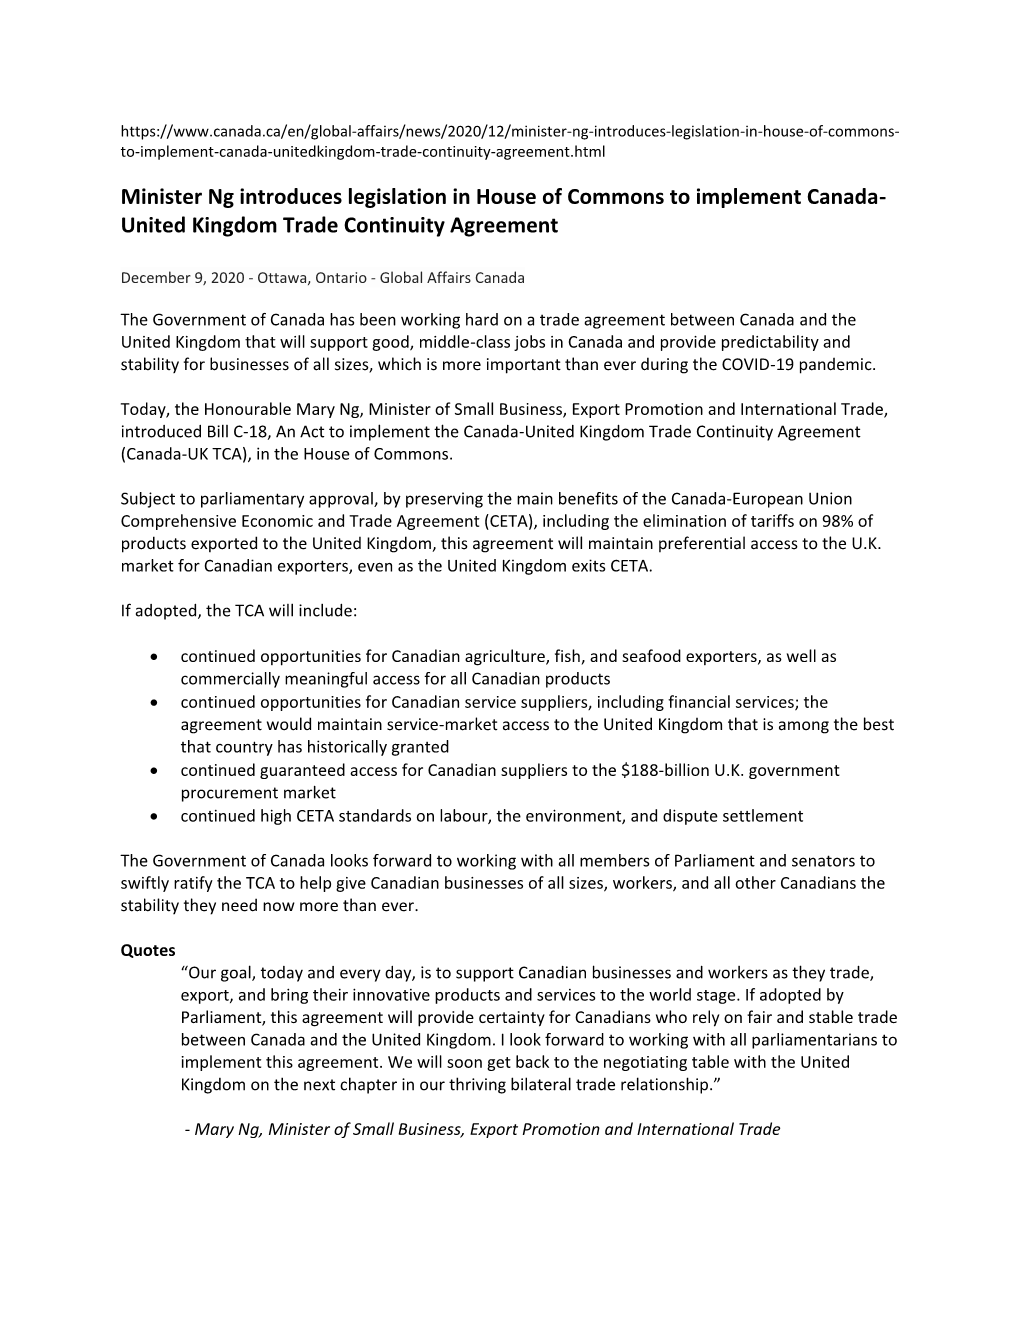 Minister Ng Introduces Legislation in House of Commons to Implement Canada- United Kingdom Trade Continuity Agreement